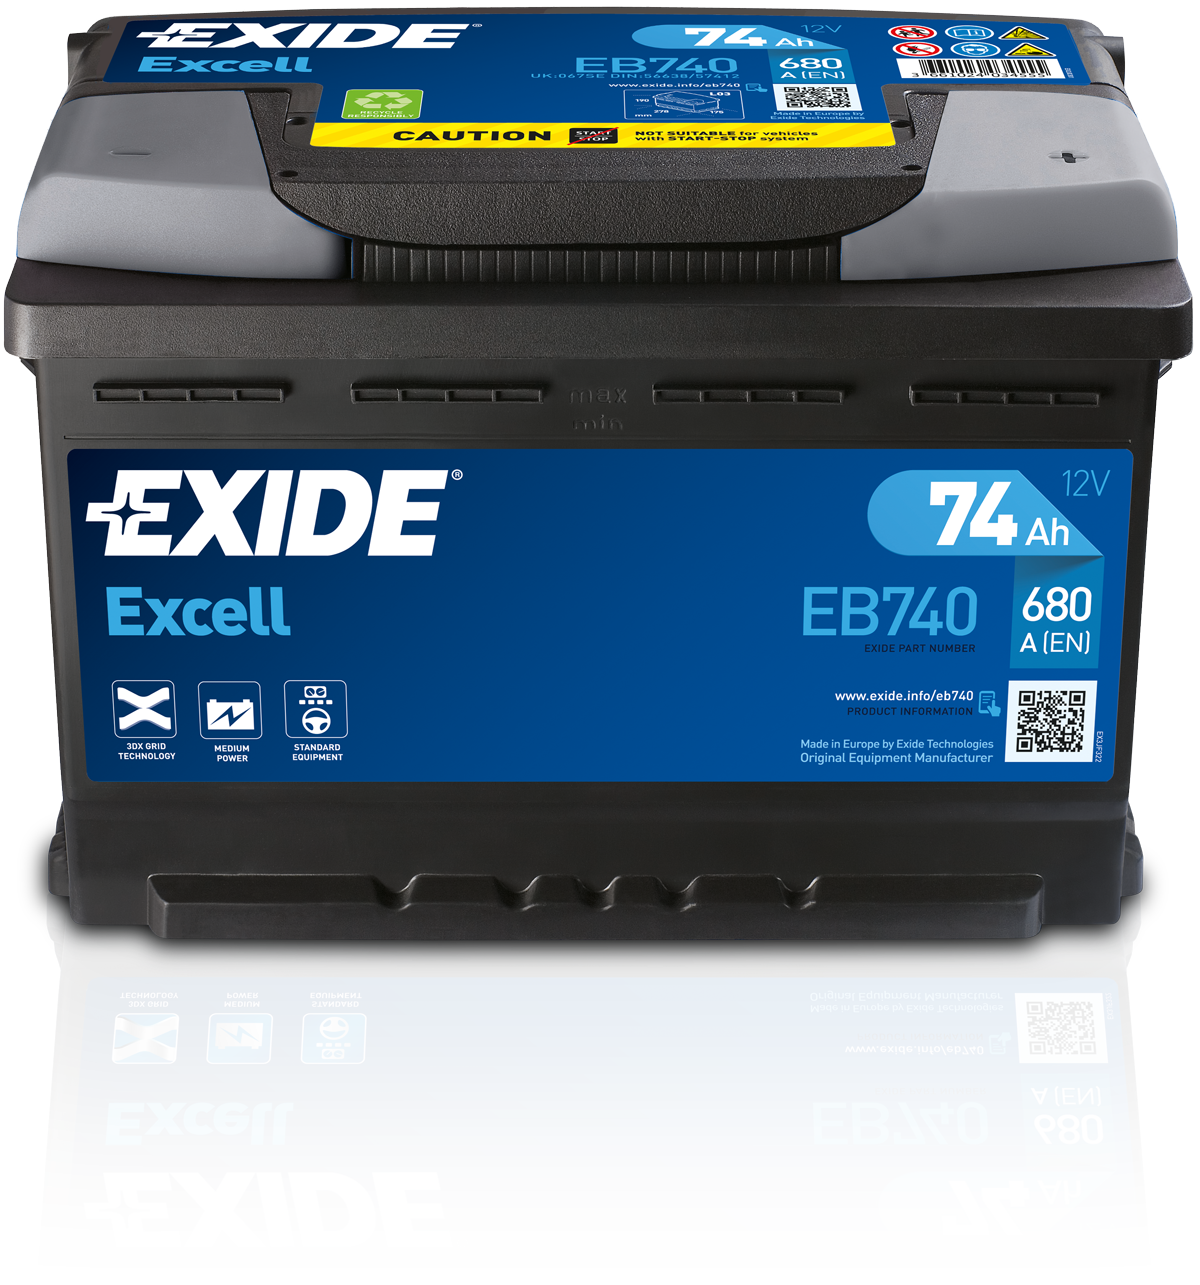 Exide Excell – Allrounder Autobatterie